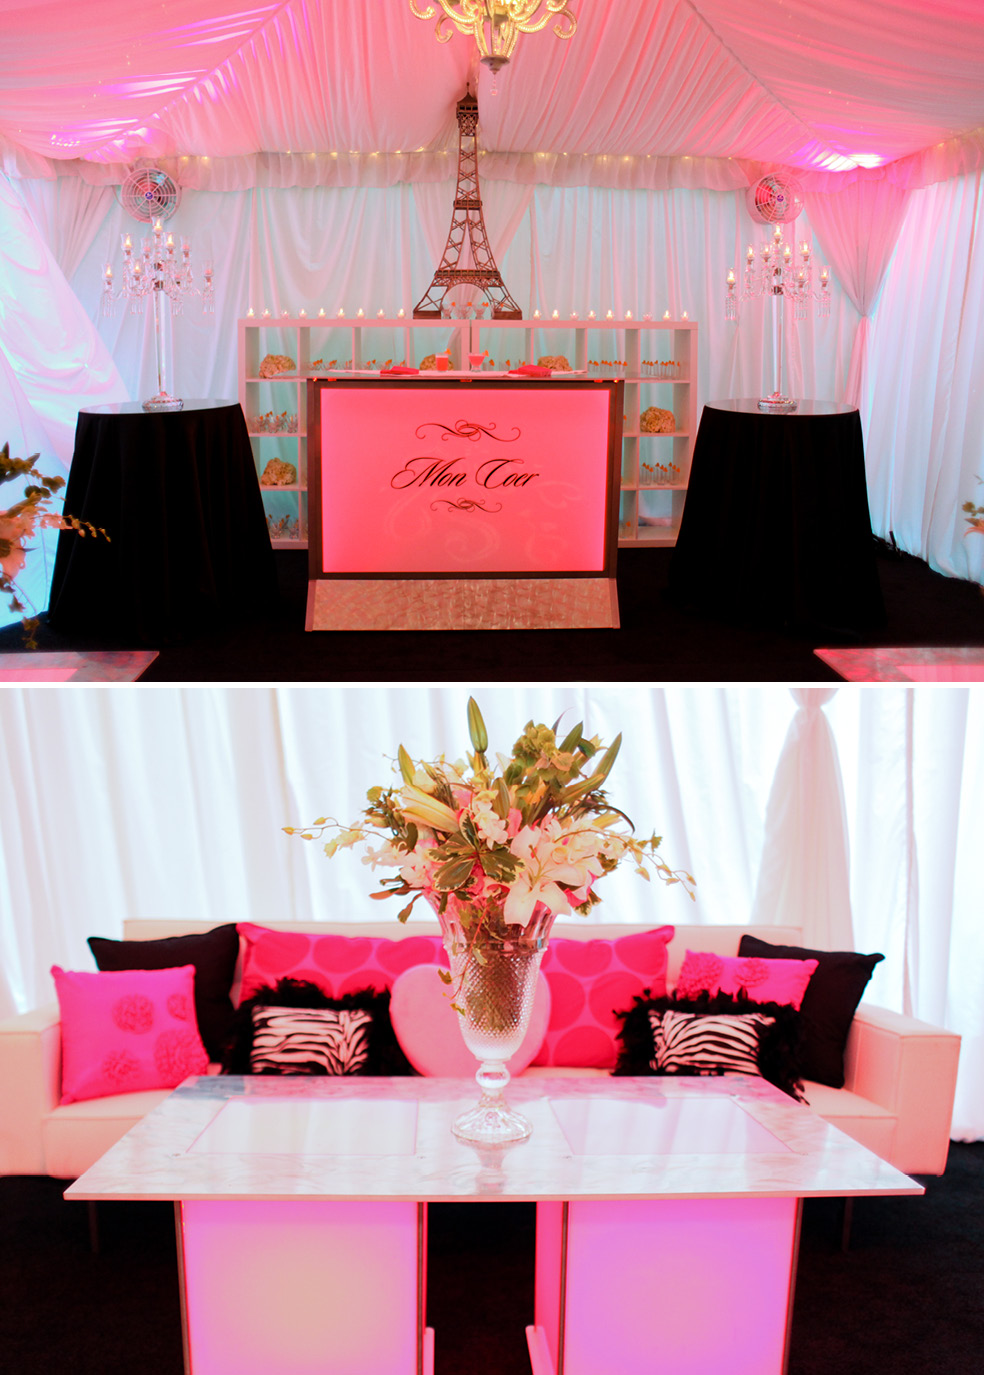 black and white and pink wedding theme